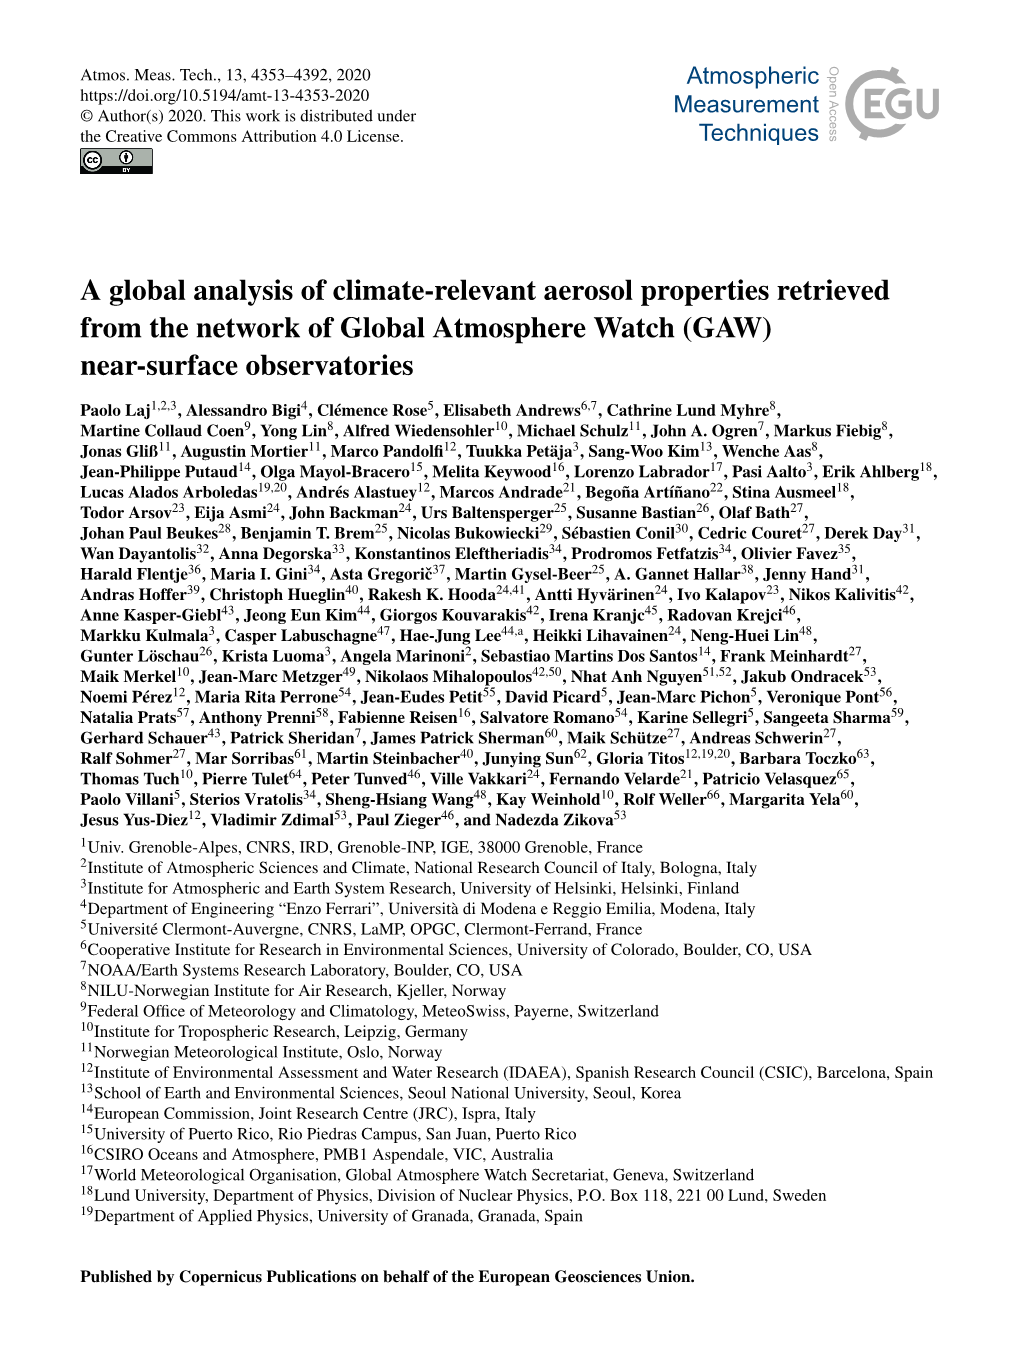 A Global Analysis of Climate-Relevant Aerosol Properties Retrieved from the Network of Global Atmosphere Watch (GAW) Near-Surface Observatories